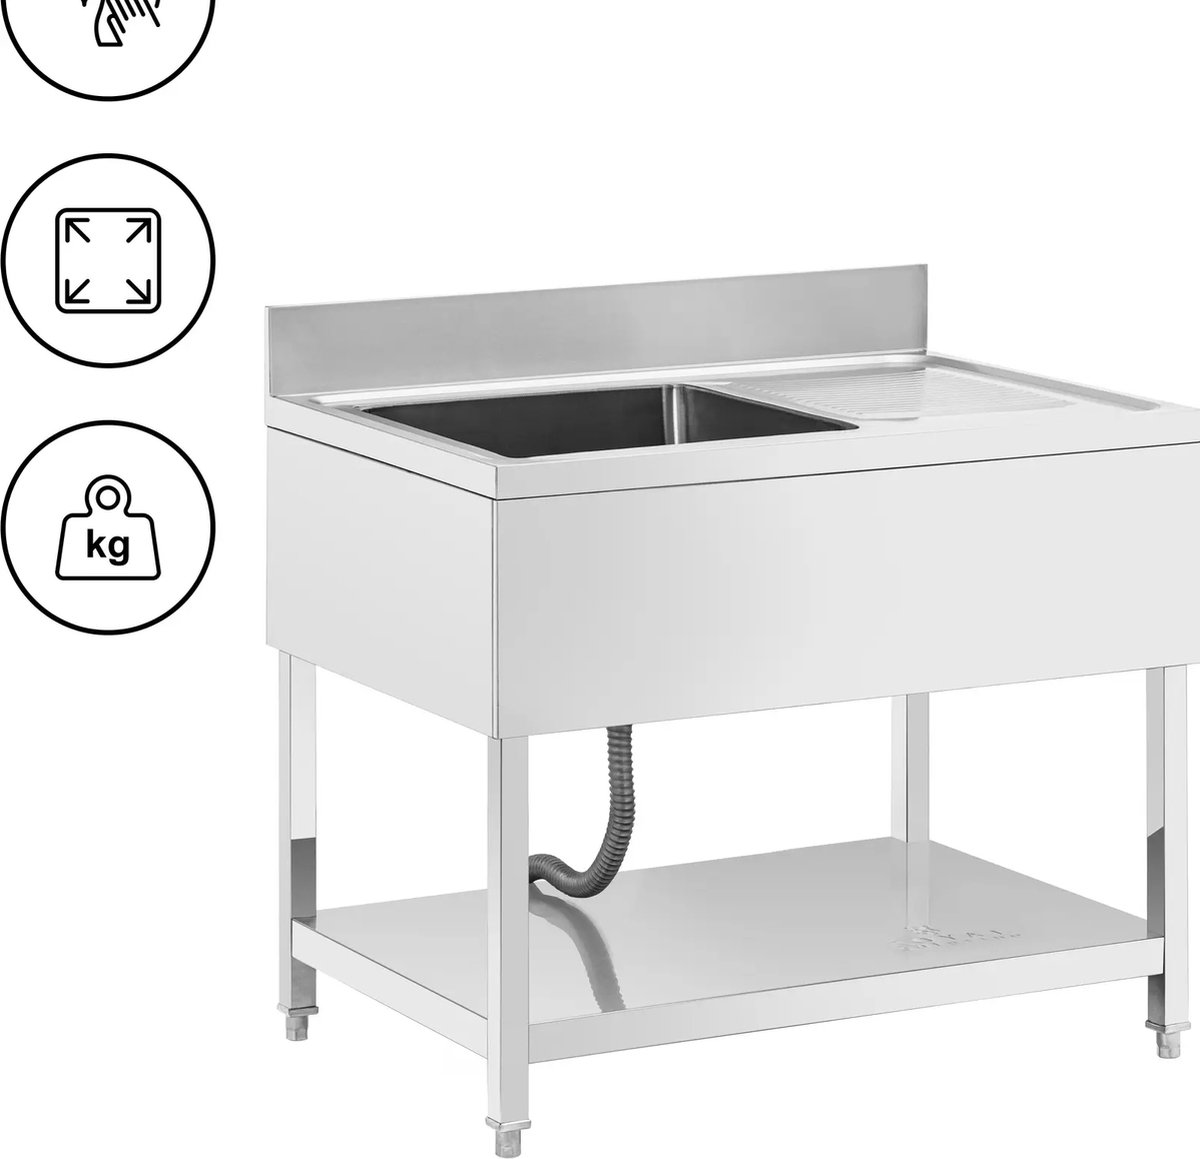 Royal Catering Rinse Table - 1 bekken - roestvrij staal - 100 x 70 x 97 cm - Royal Catering